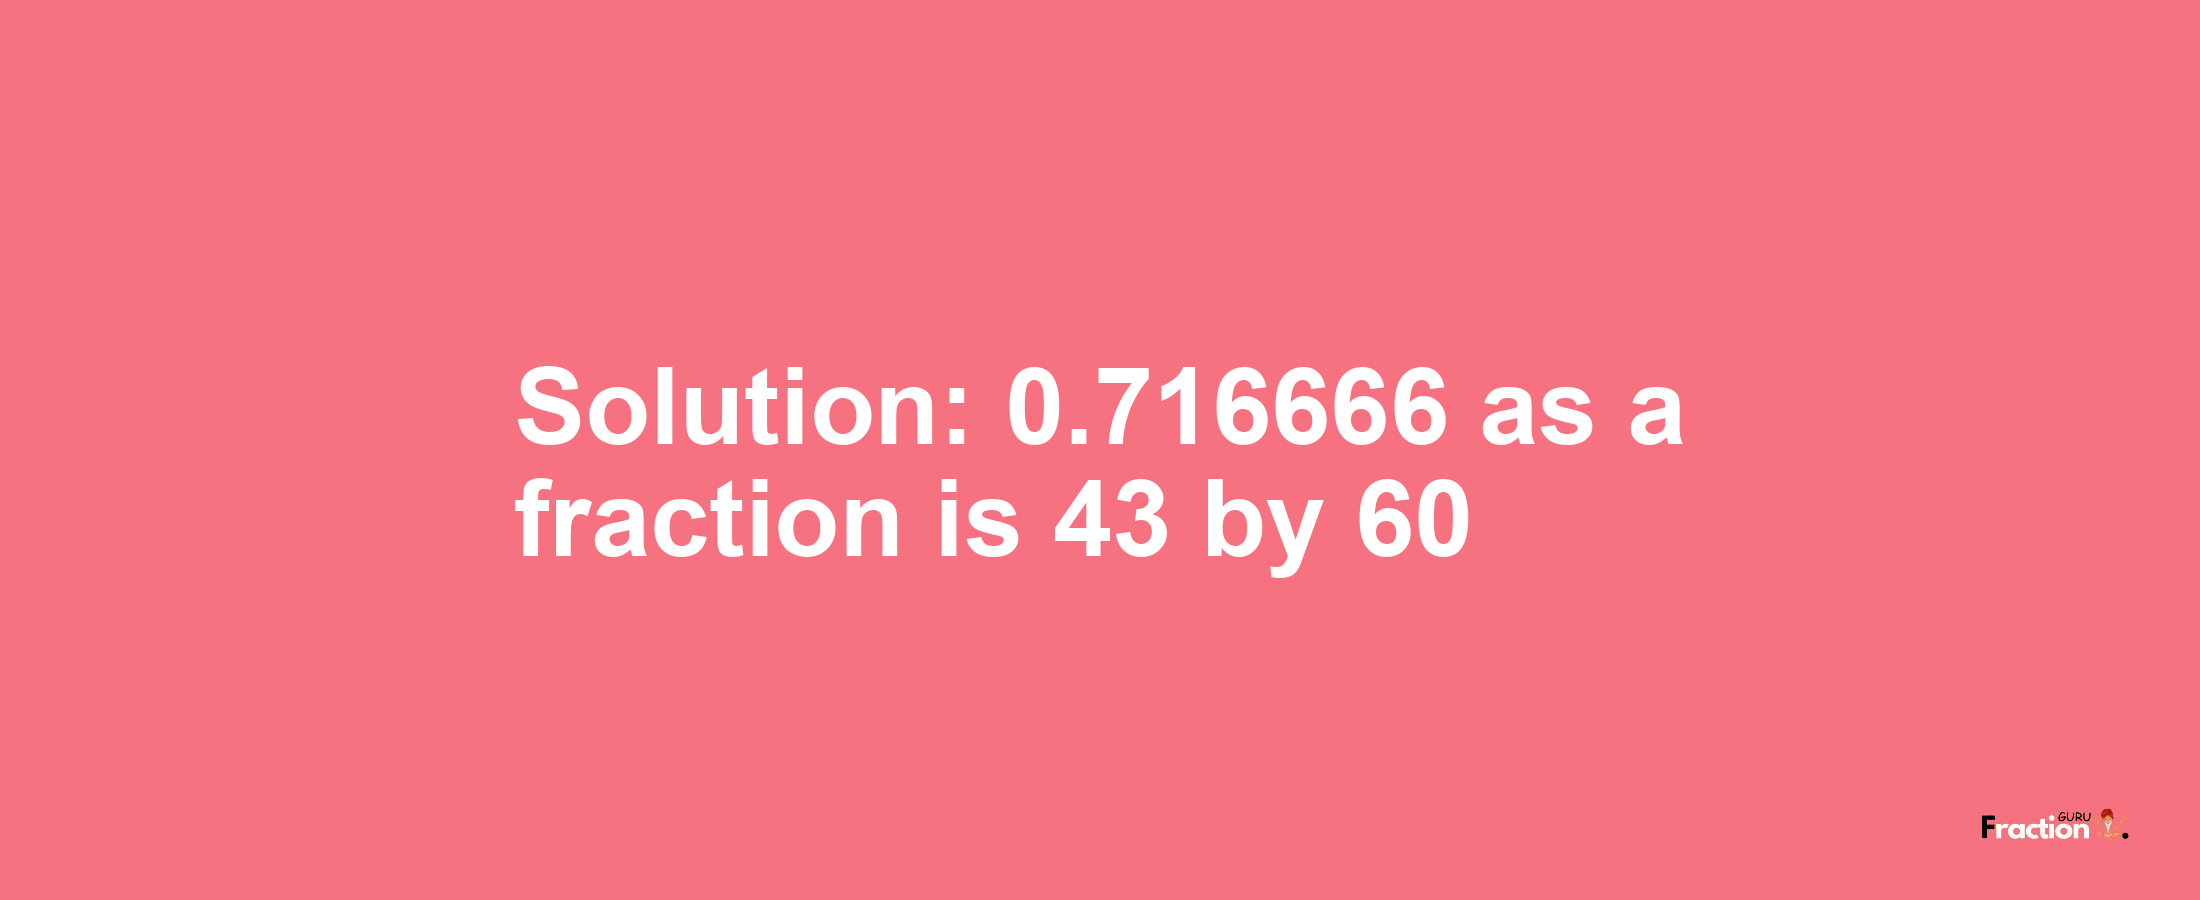 Solution:0.716666 as a fraction is 43/60